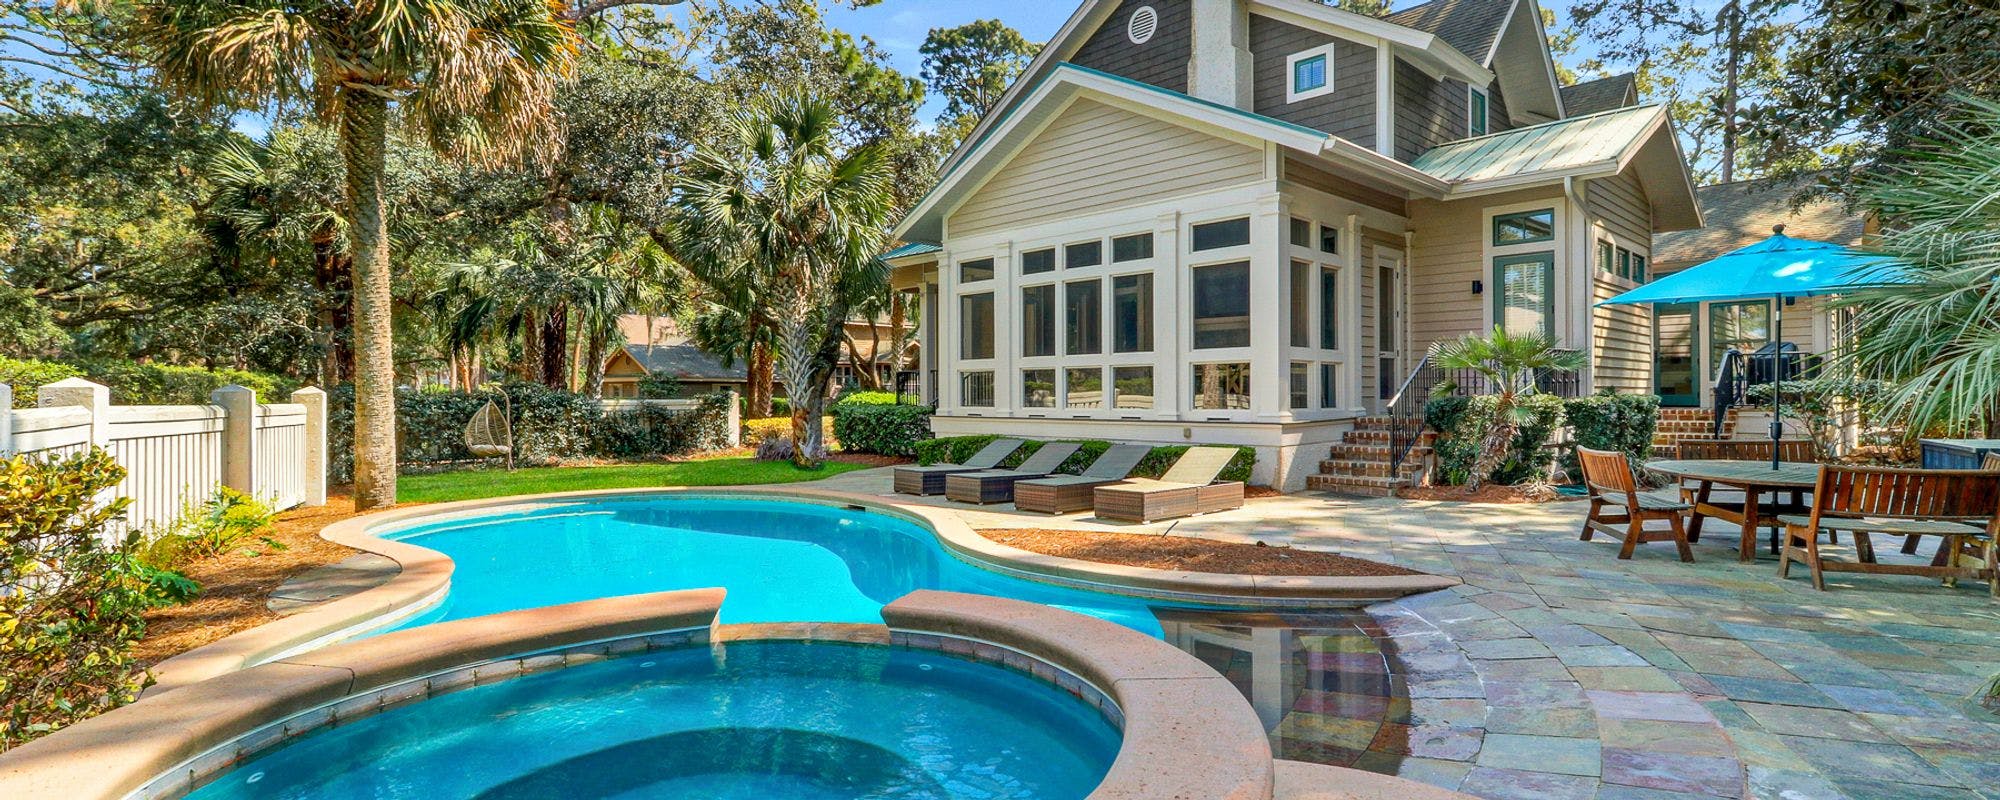 Vacation rental home with pool and hot tub